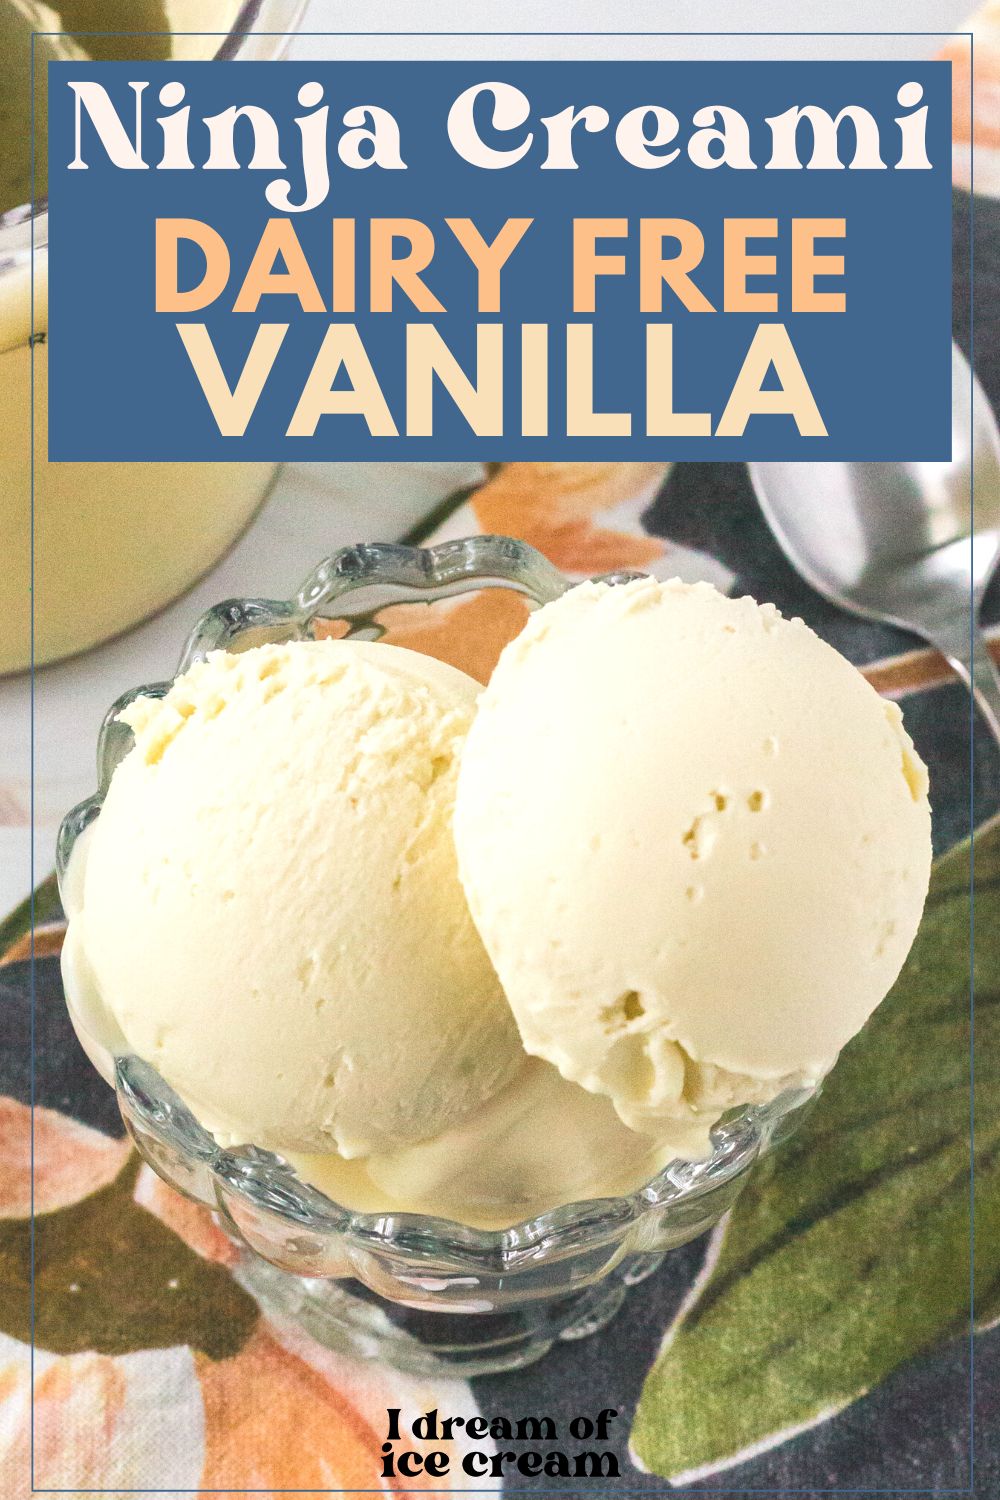 scoops of Ninja Creami dairy free vanilla ice cream in a glass dish atop a floral napkin